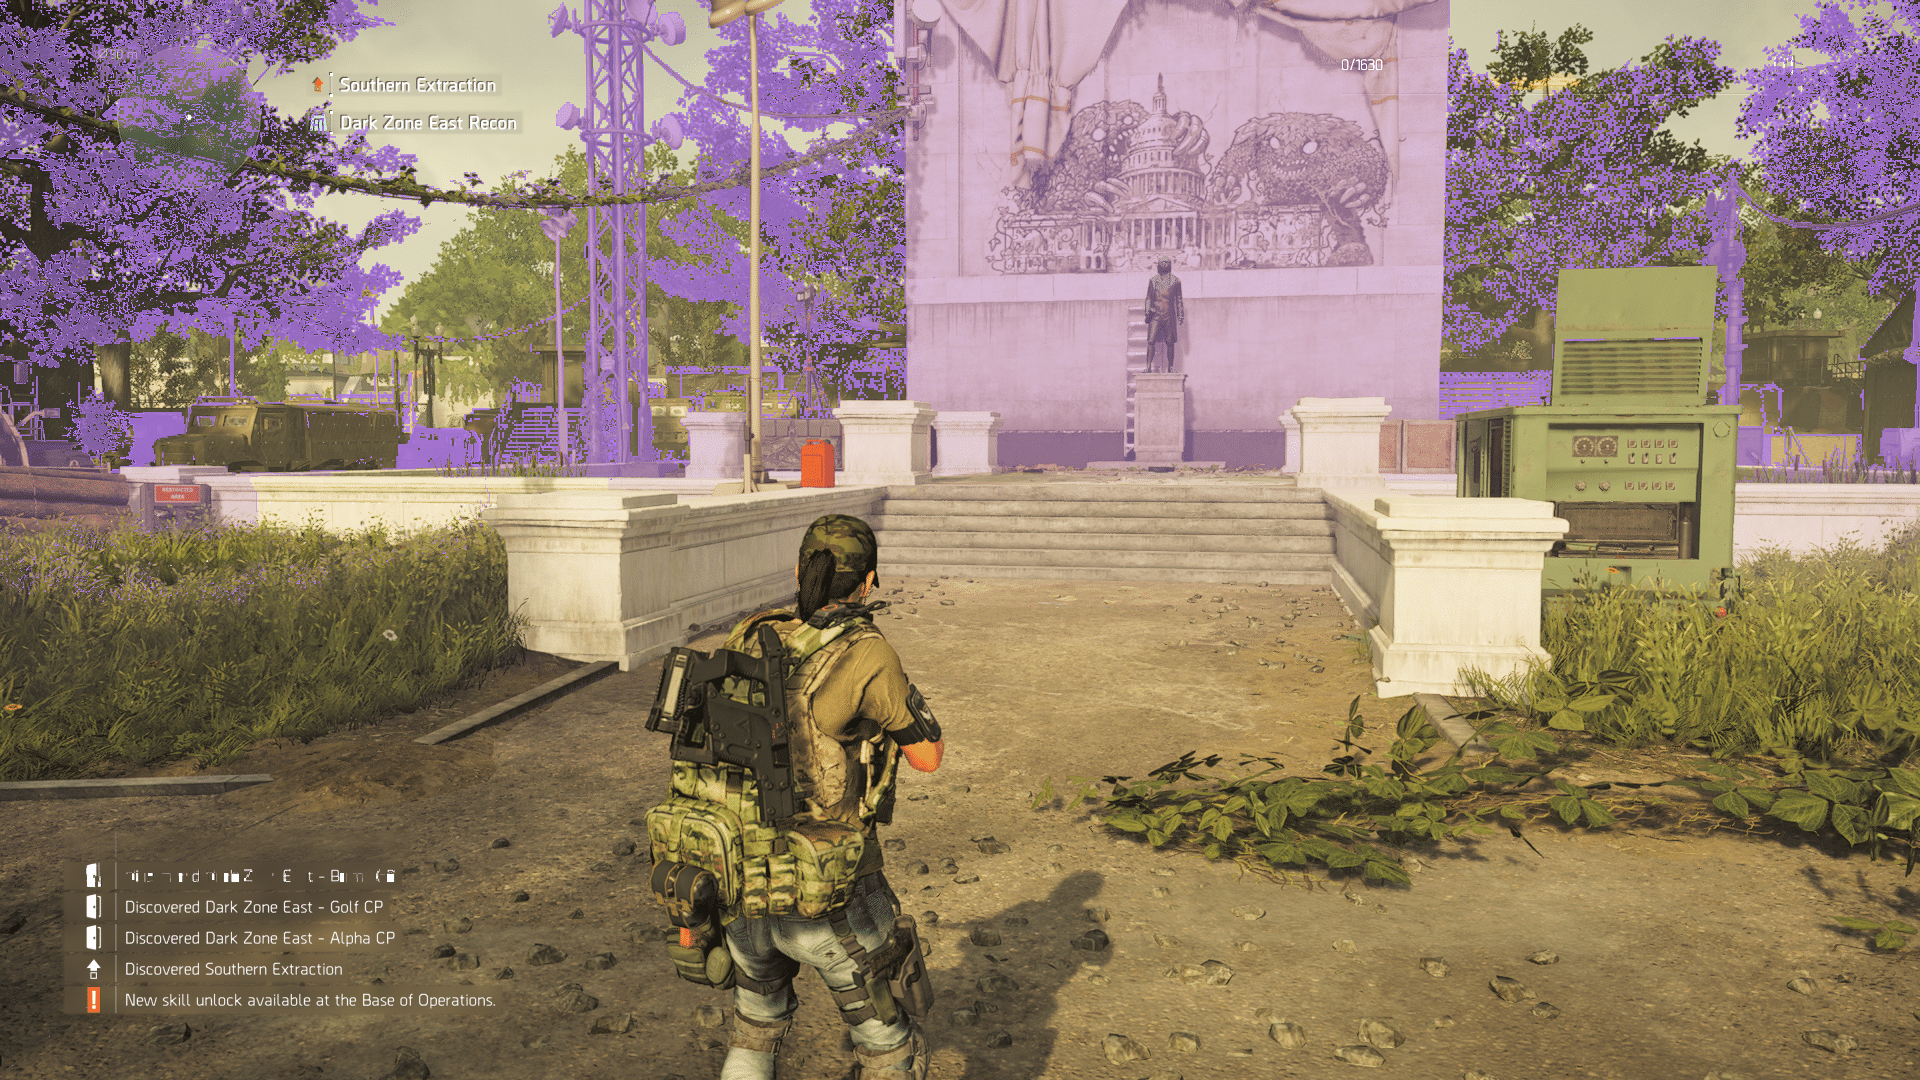 TheDivision2 4 1 2019 7 53 22 PM 647